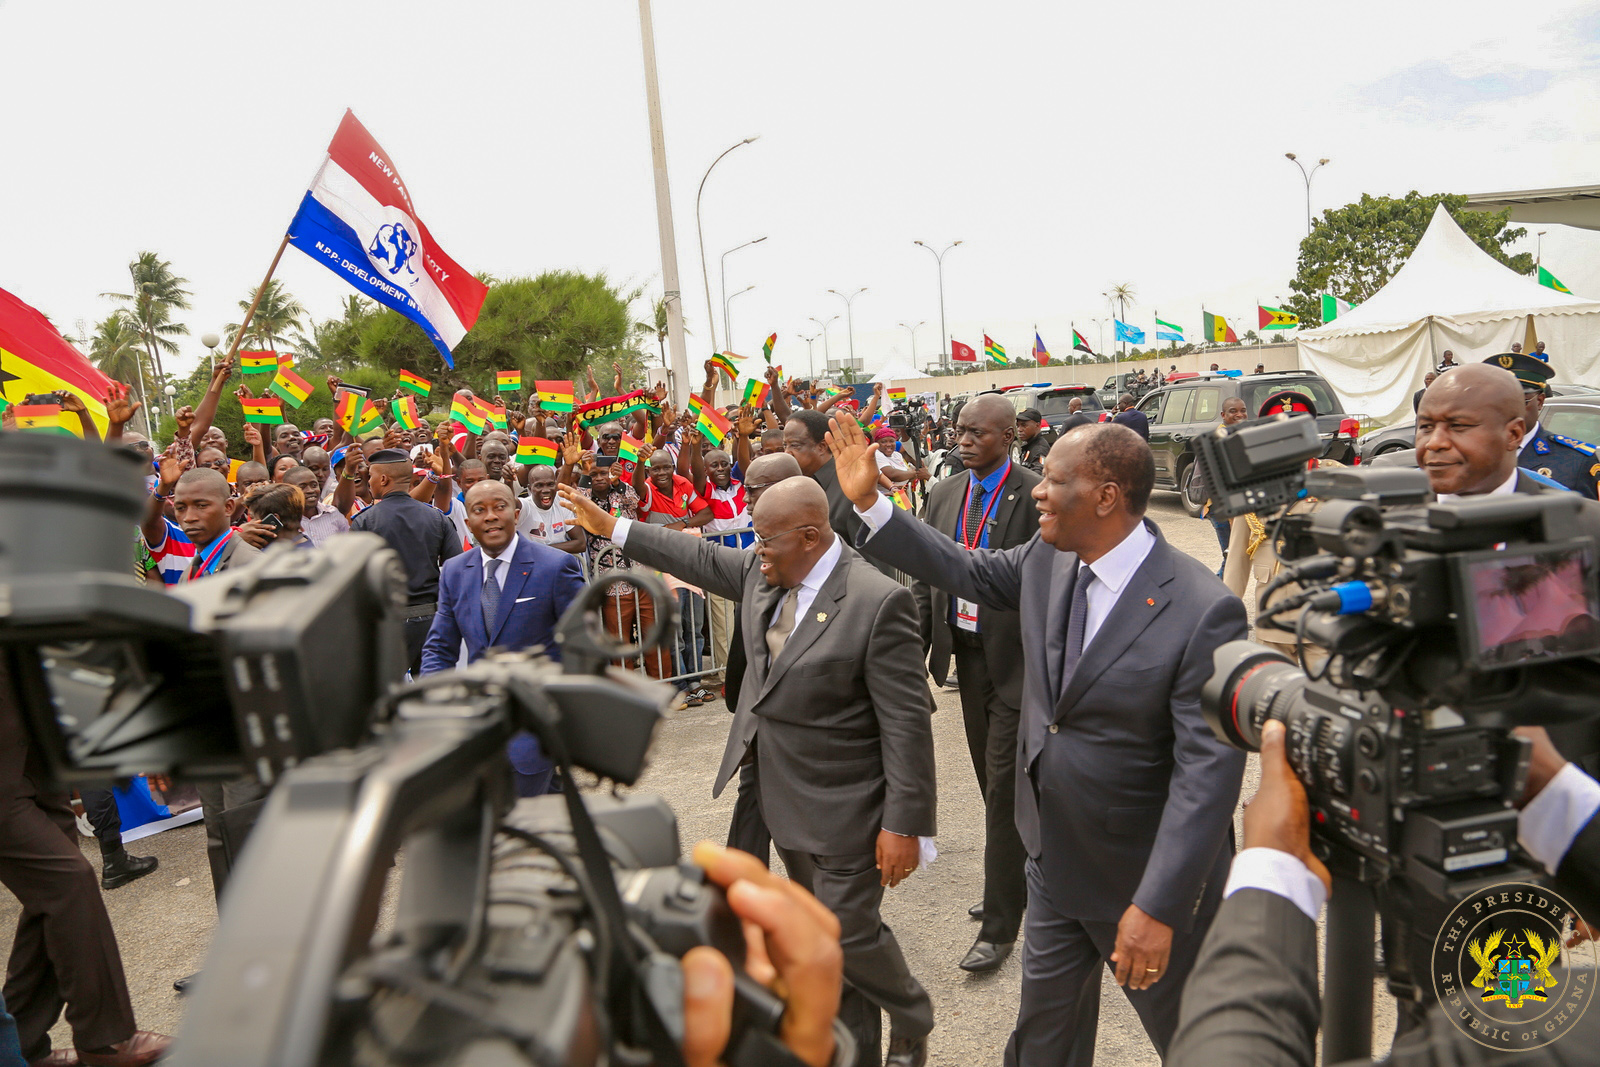 president-akufo-addo-acknowledging-the-ghanaian-community-outside-of-the-airport